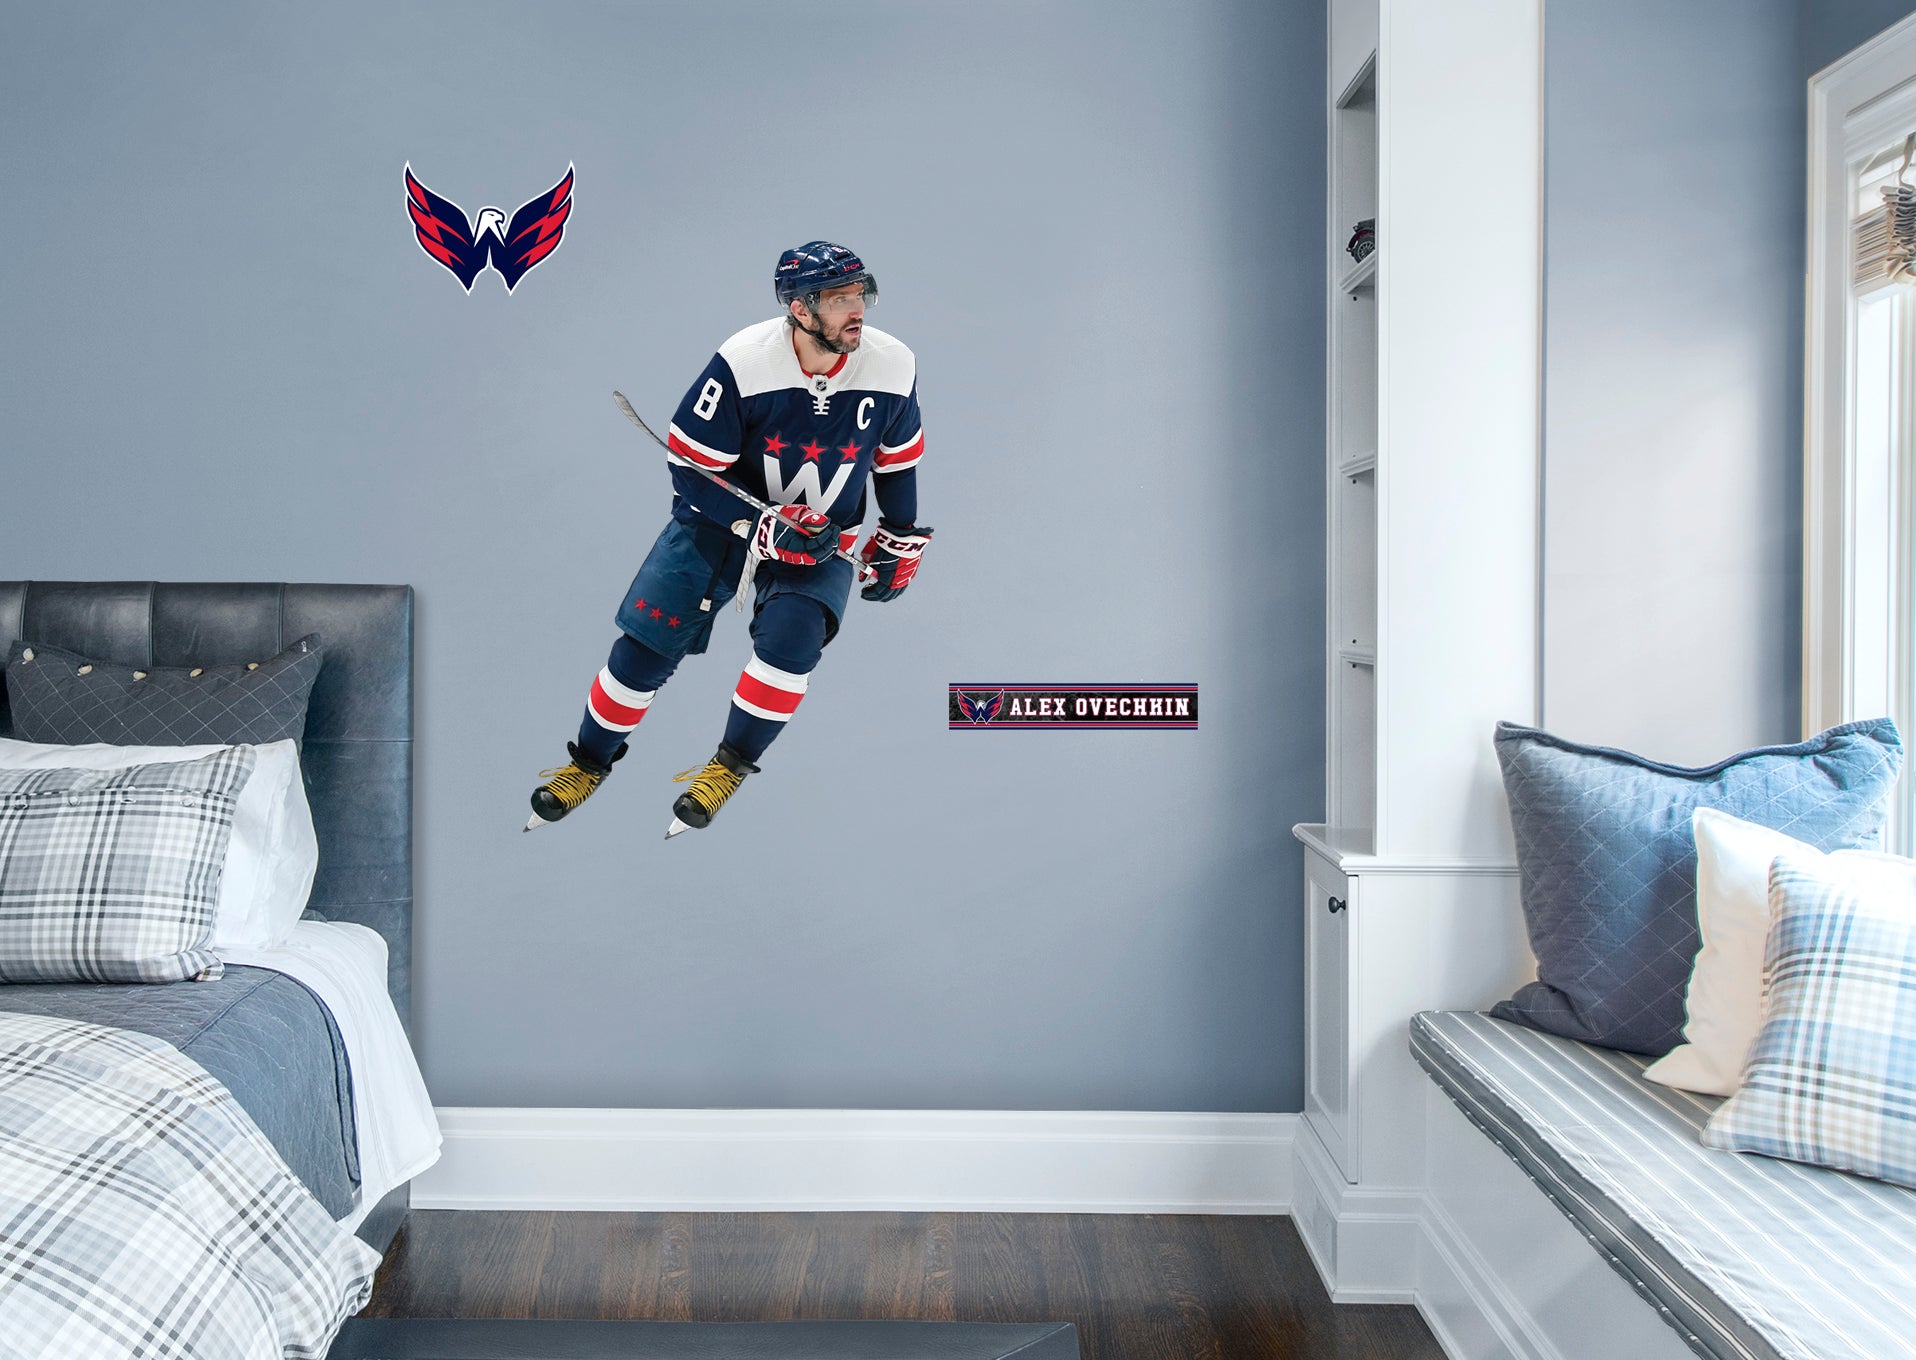 Giant Athlete + 2 Decals NHL fans and Capitals fanatics alike love Alex Ovechkin, the clutch captain from Washington D.C., and now you can bring his skill to life in your own home! Seen here in action on the ice in the striking blue uniform, this durable, bold, and removable wall decal set will make the perfect addition to your bedroom, office, fan room, or any spot in your house! Let's Go Caps!